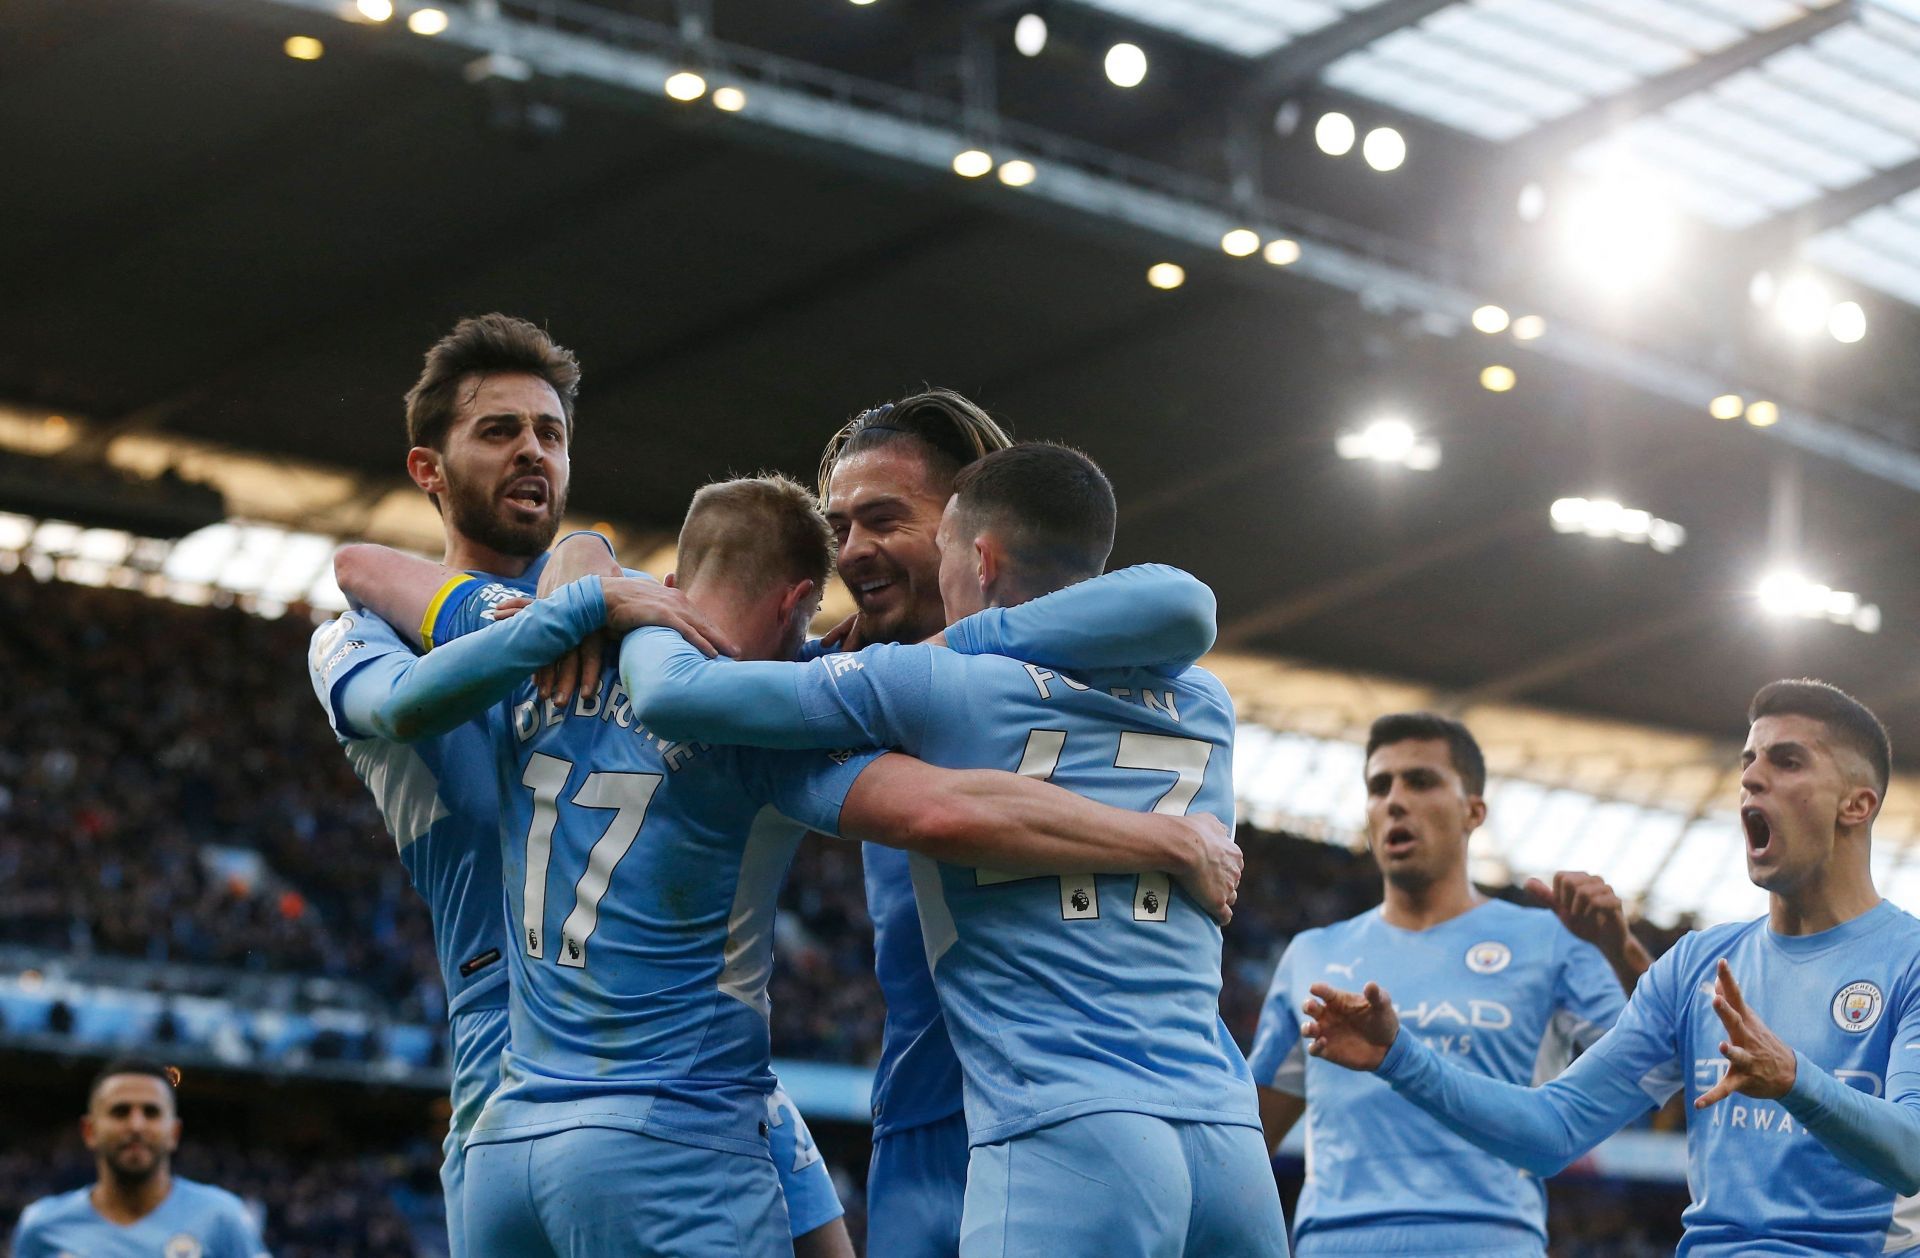 Manchester City players celebrate one of their goals